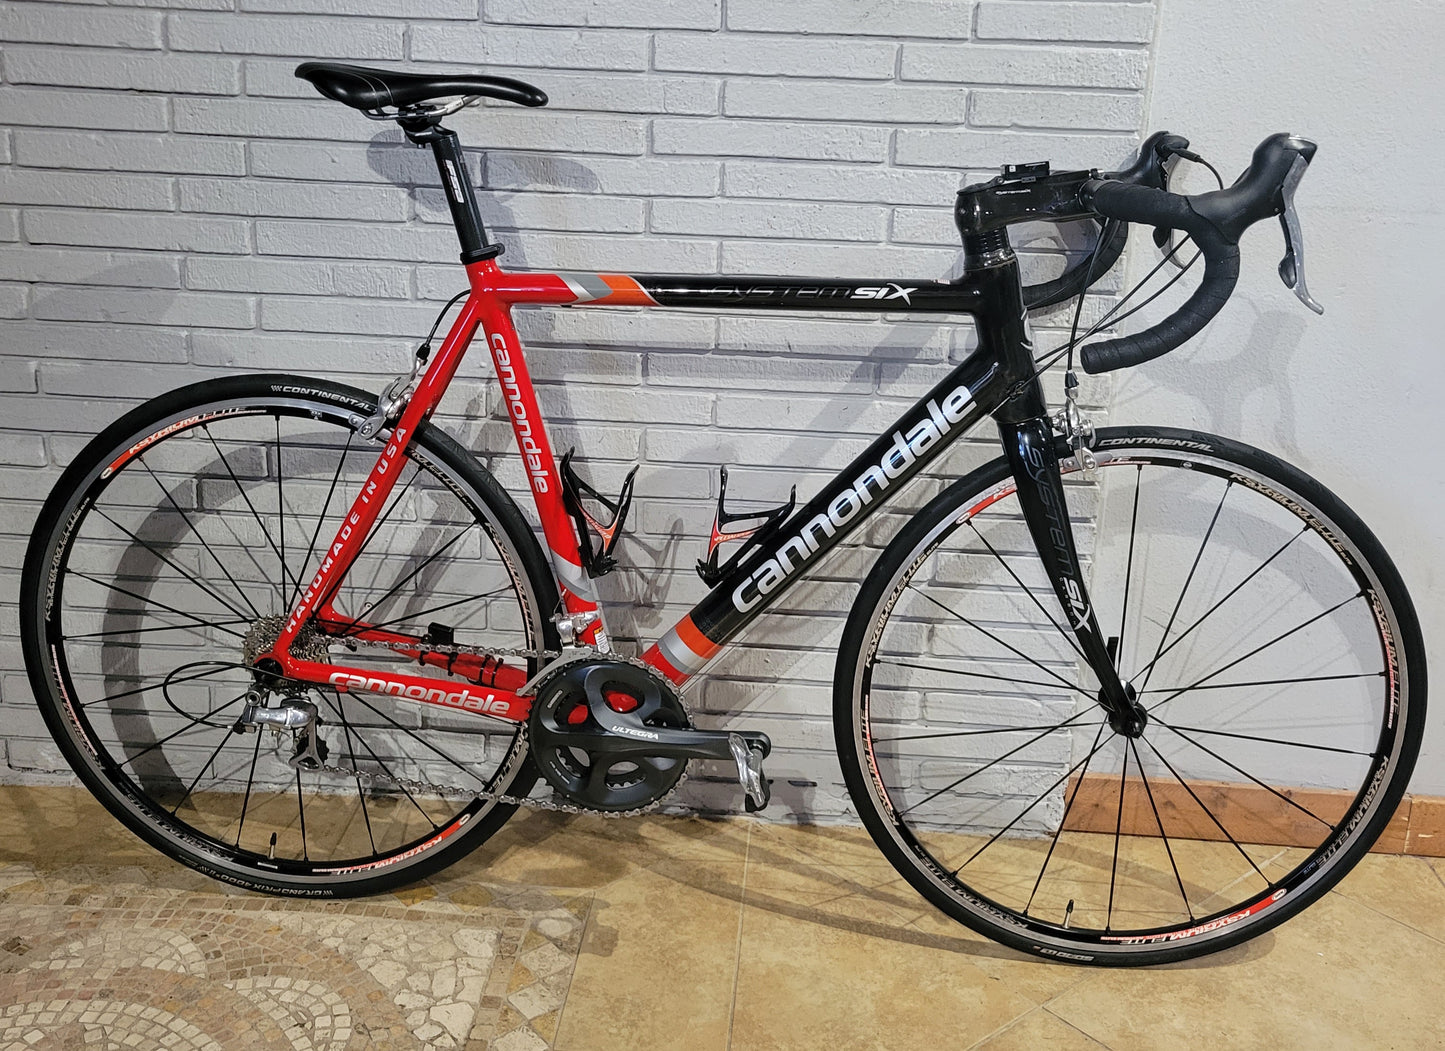 Cannondale SystemSix 58cm Carbon Road Bike